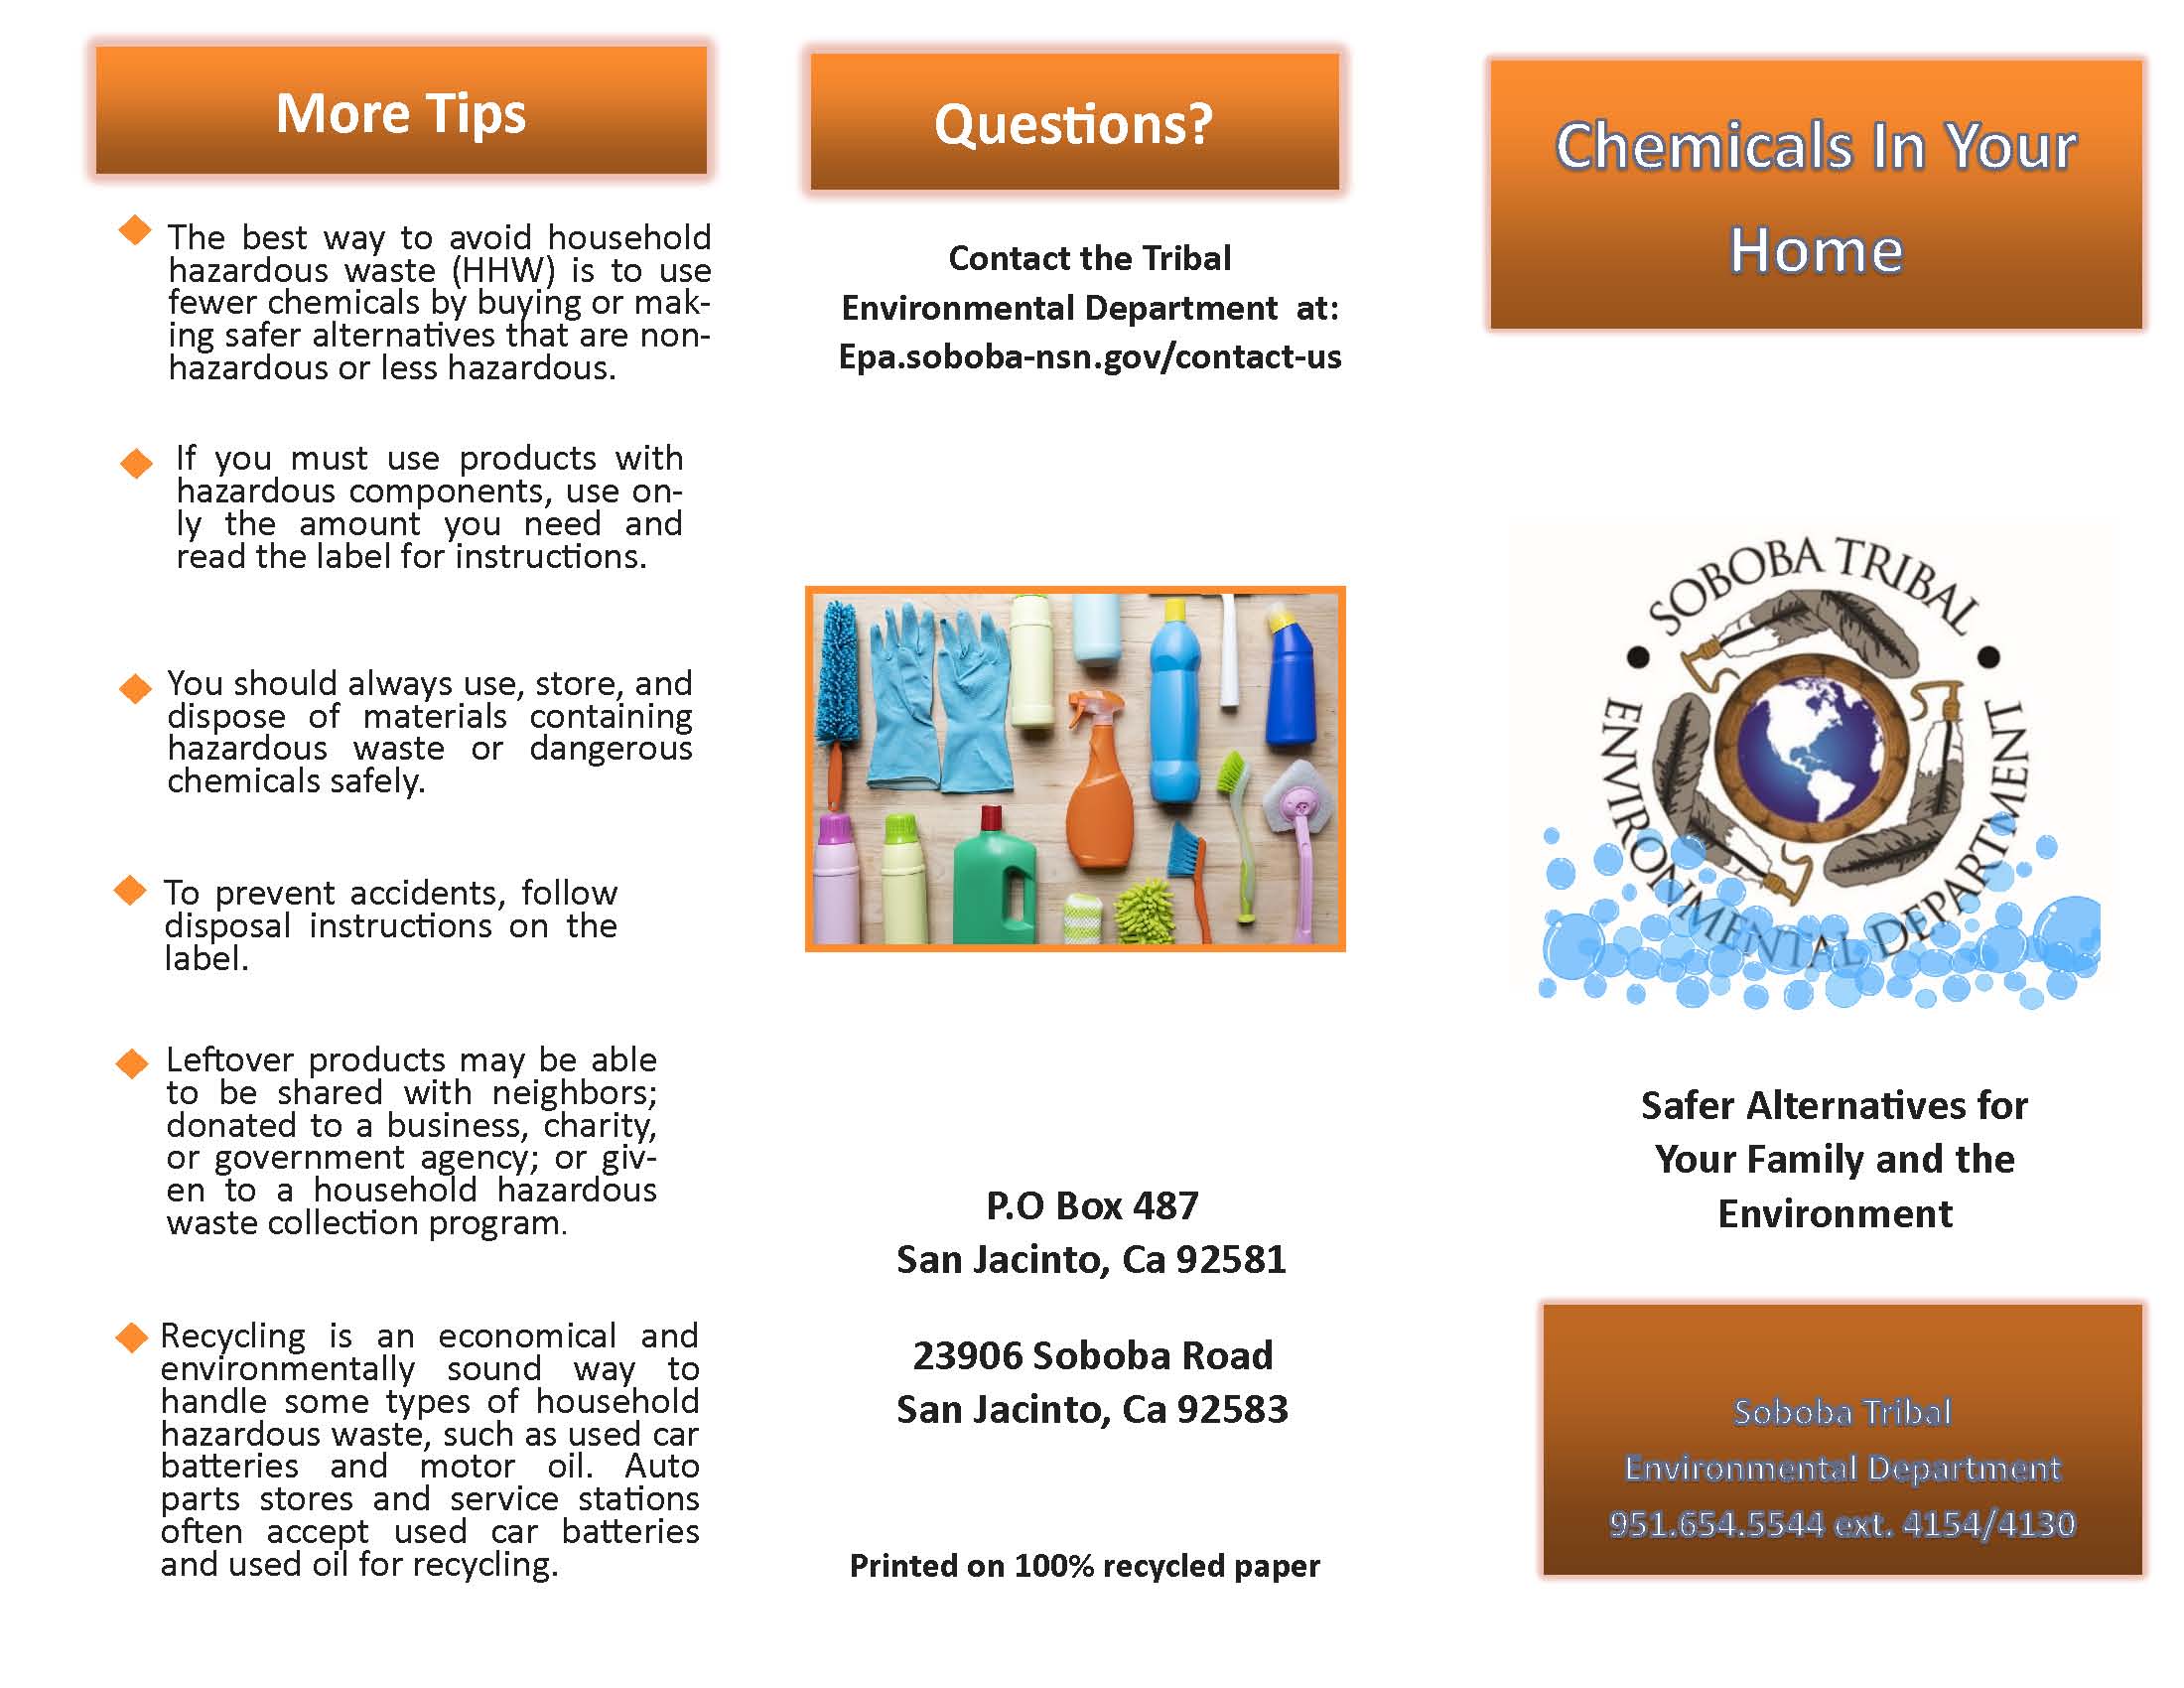 Chemicals In Your Home